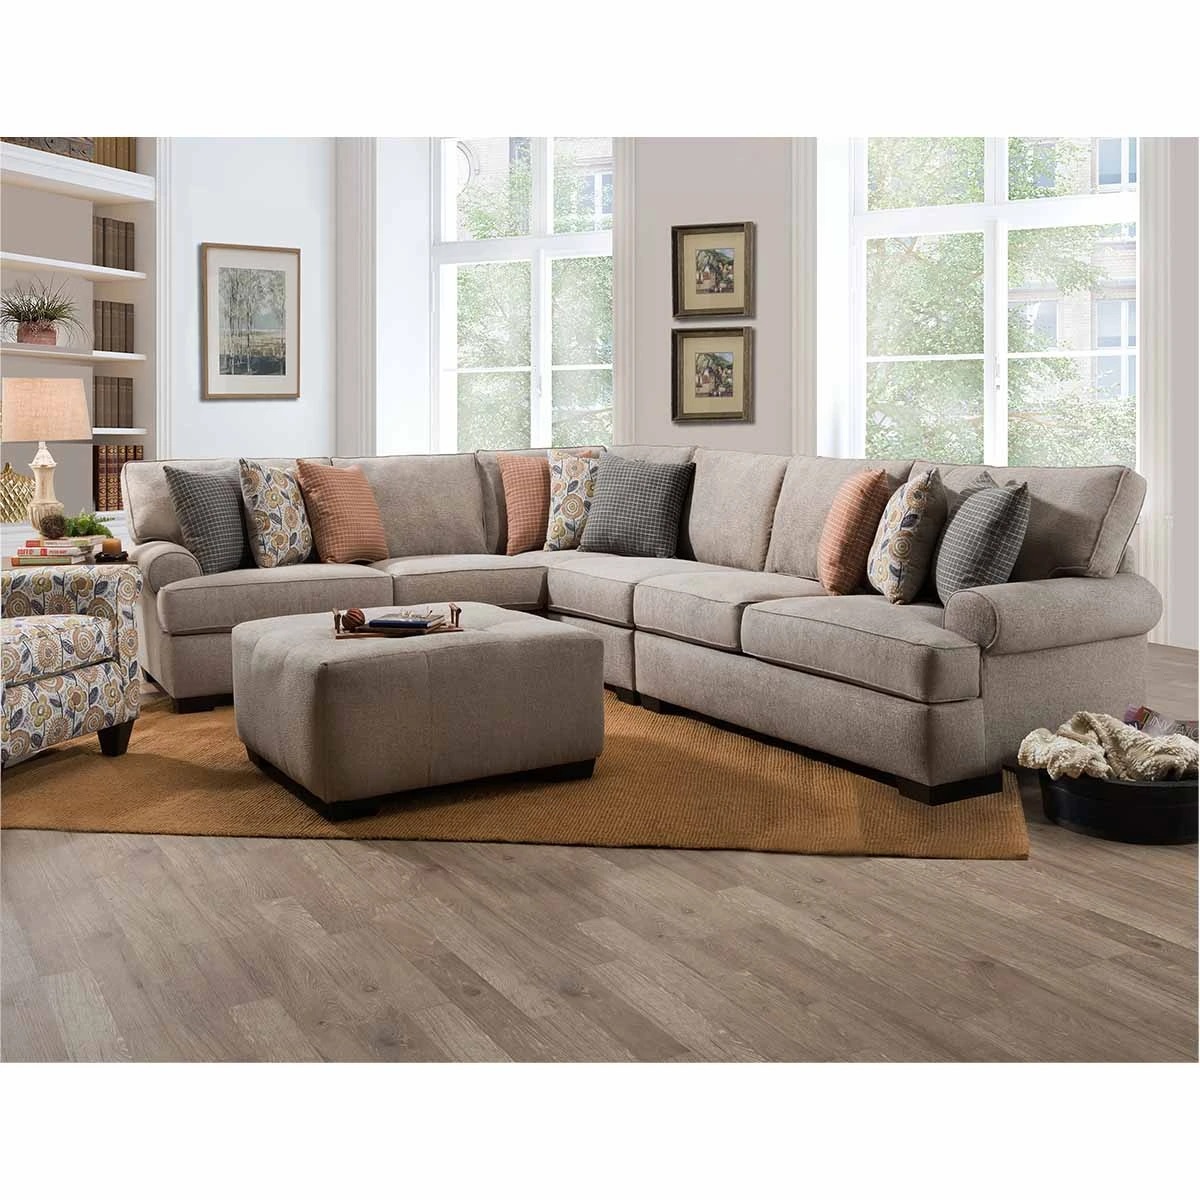 Sectional sofa in bright living room 